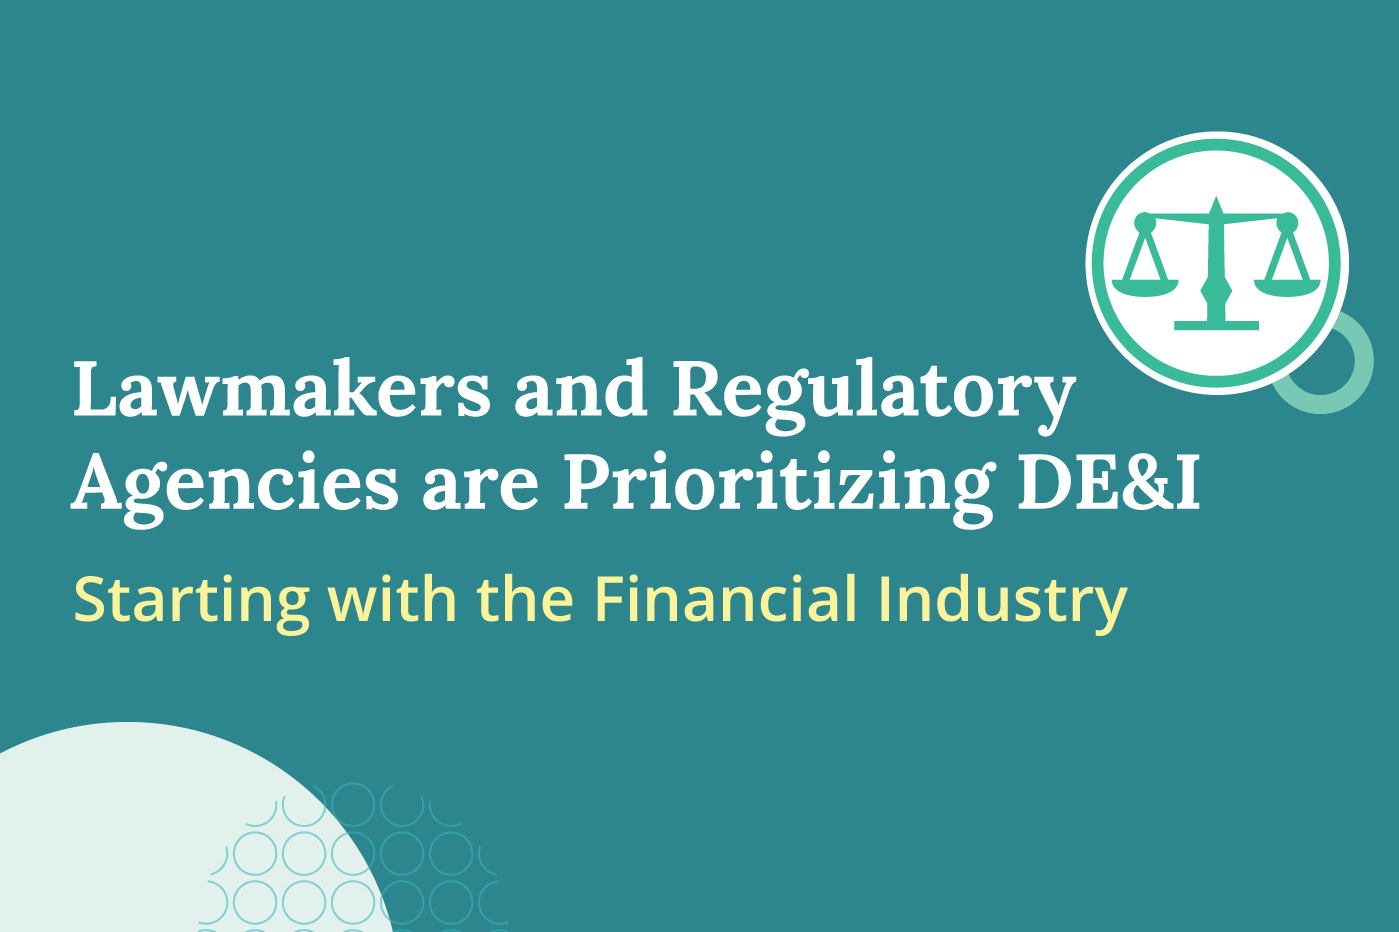 Lawmakers and Regulatory Agencies are Prioritizing DE&I and Starting with the Financial Industry